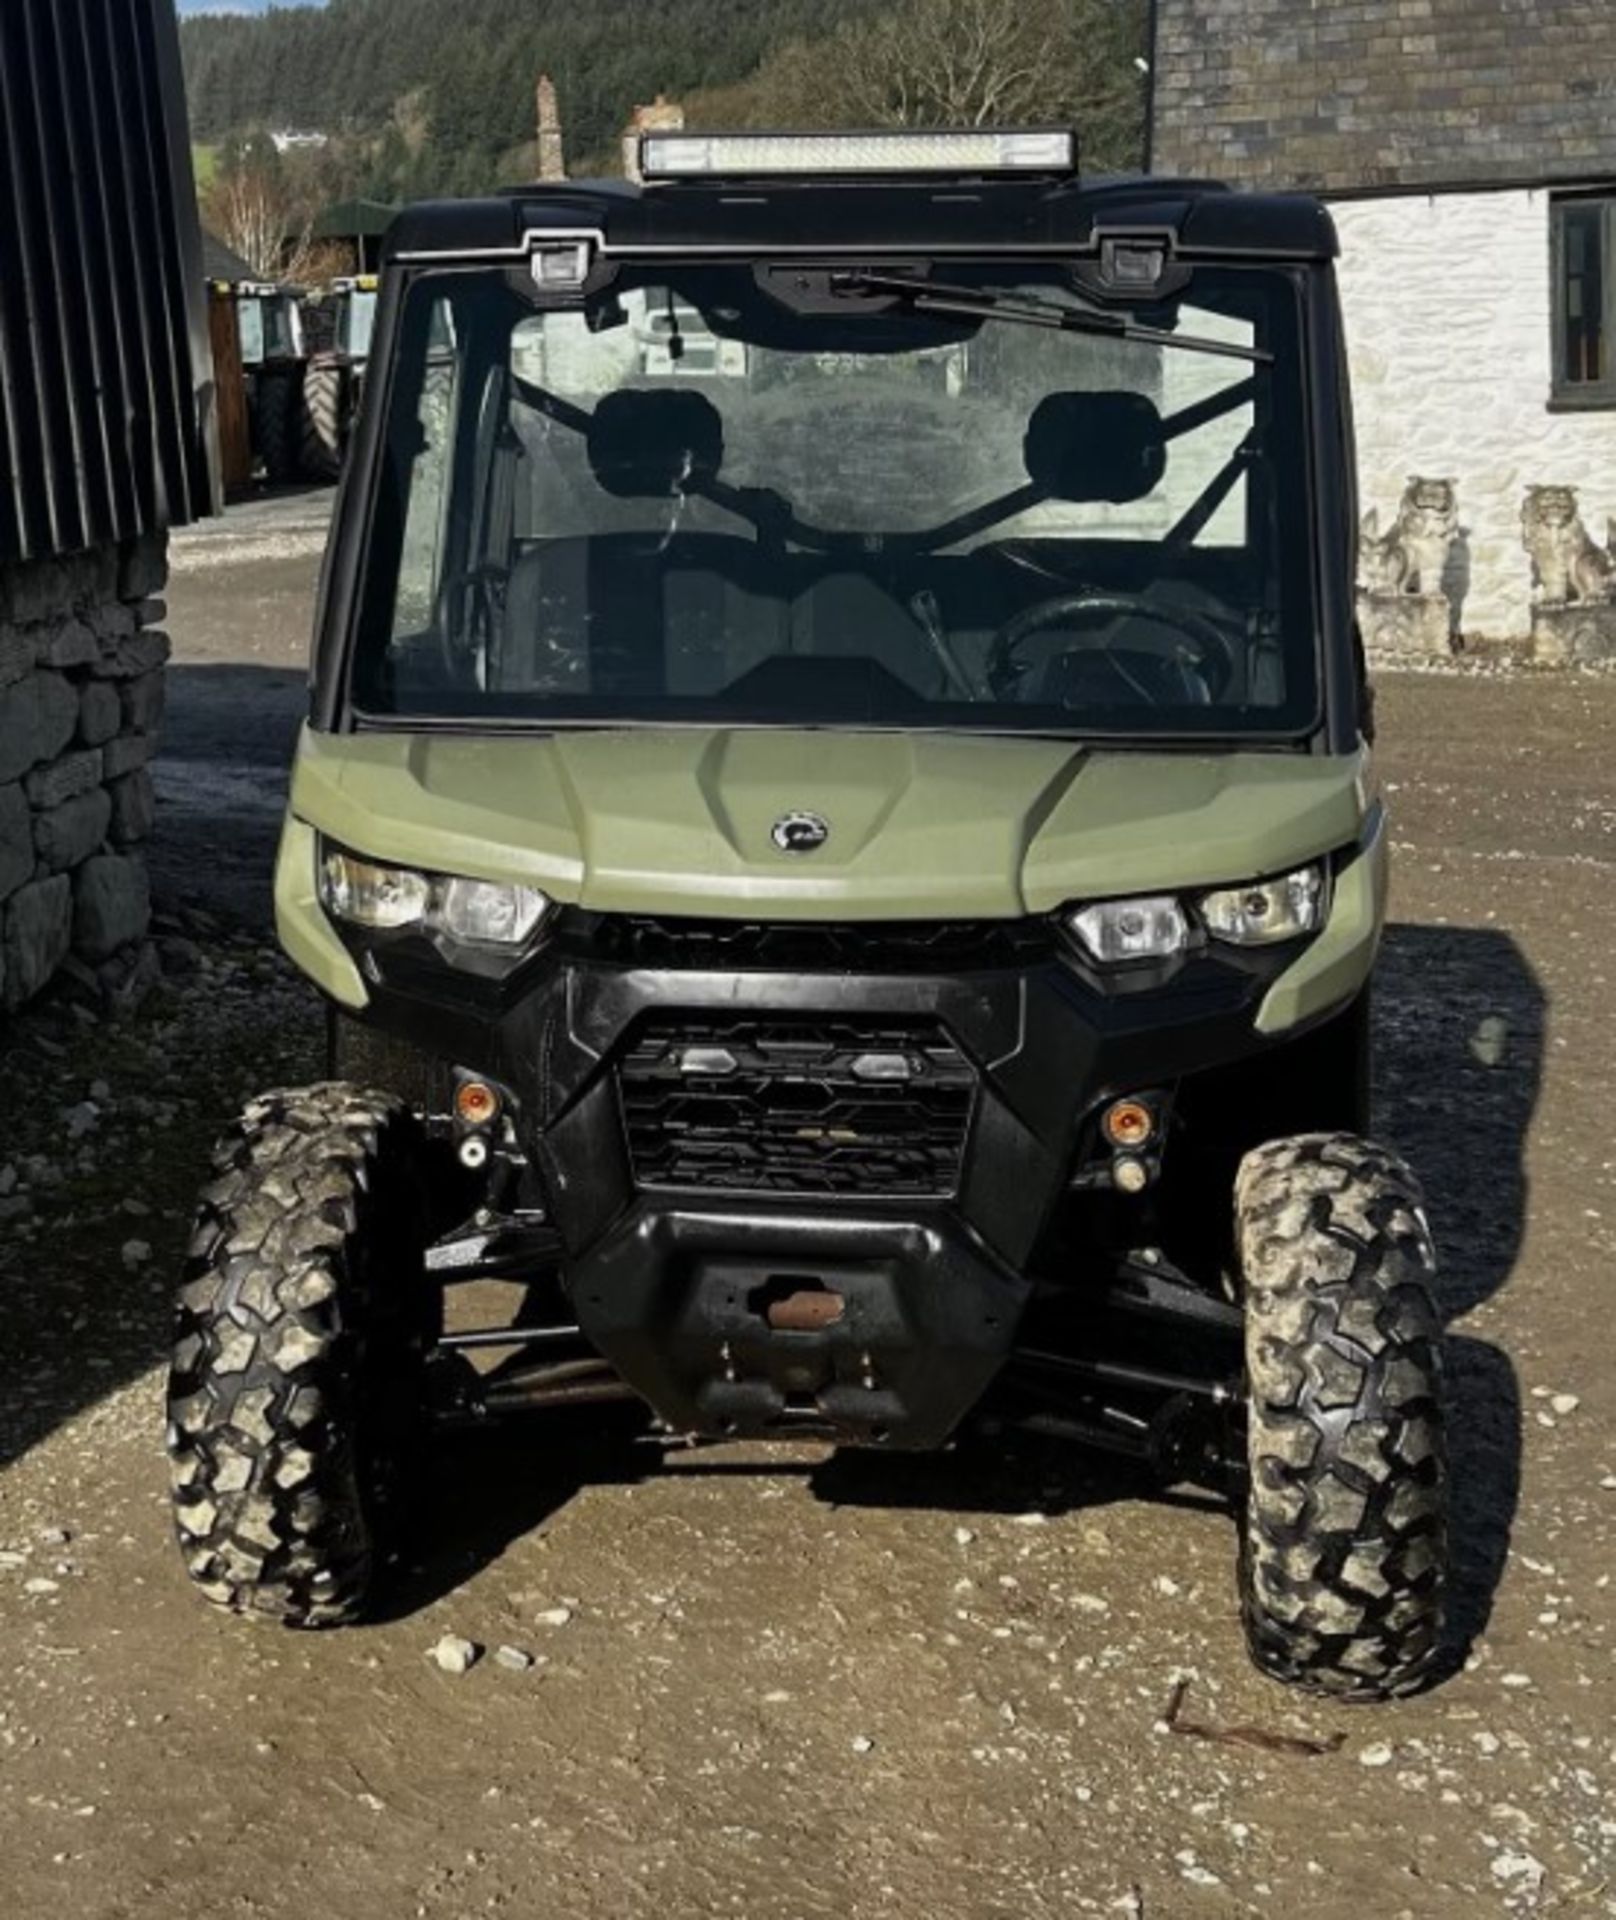 2020 CAN AM TRAXTER HD8 - YOUR RELIABLE WORK COMPANION FOR ANY TERRAIN - Image 3 of 9